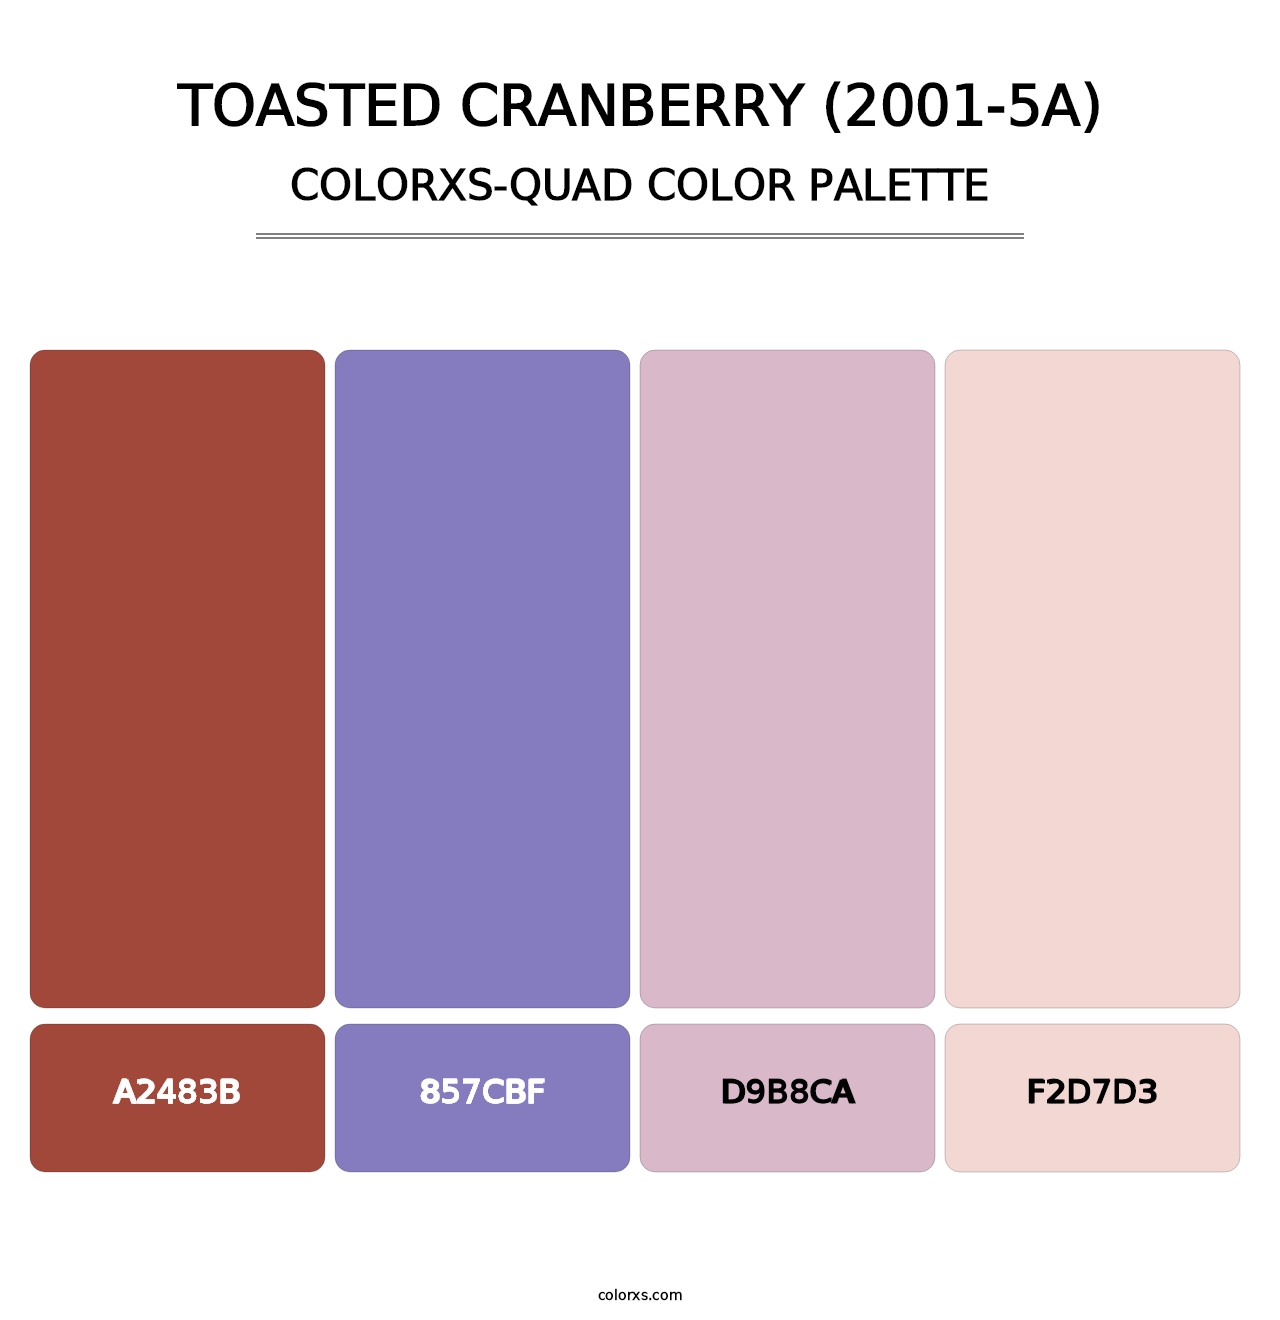 Toasted Cranberry (2001-5A) - Colorxs Quad Palette